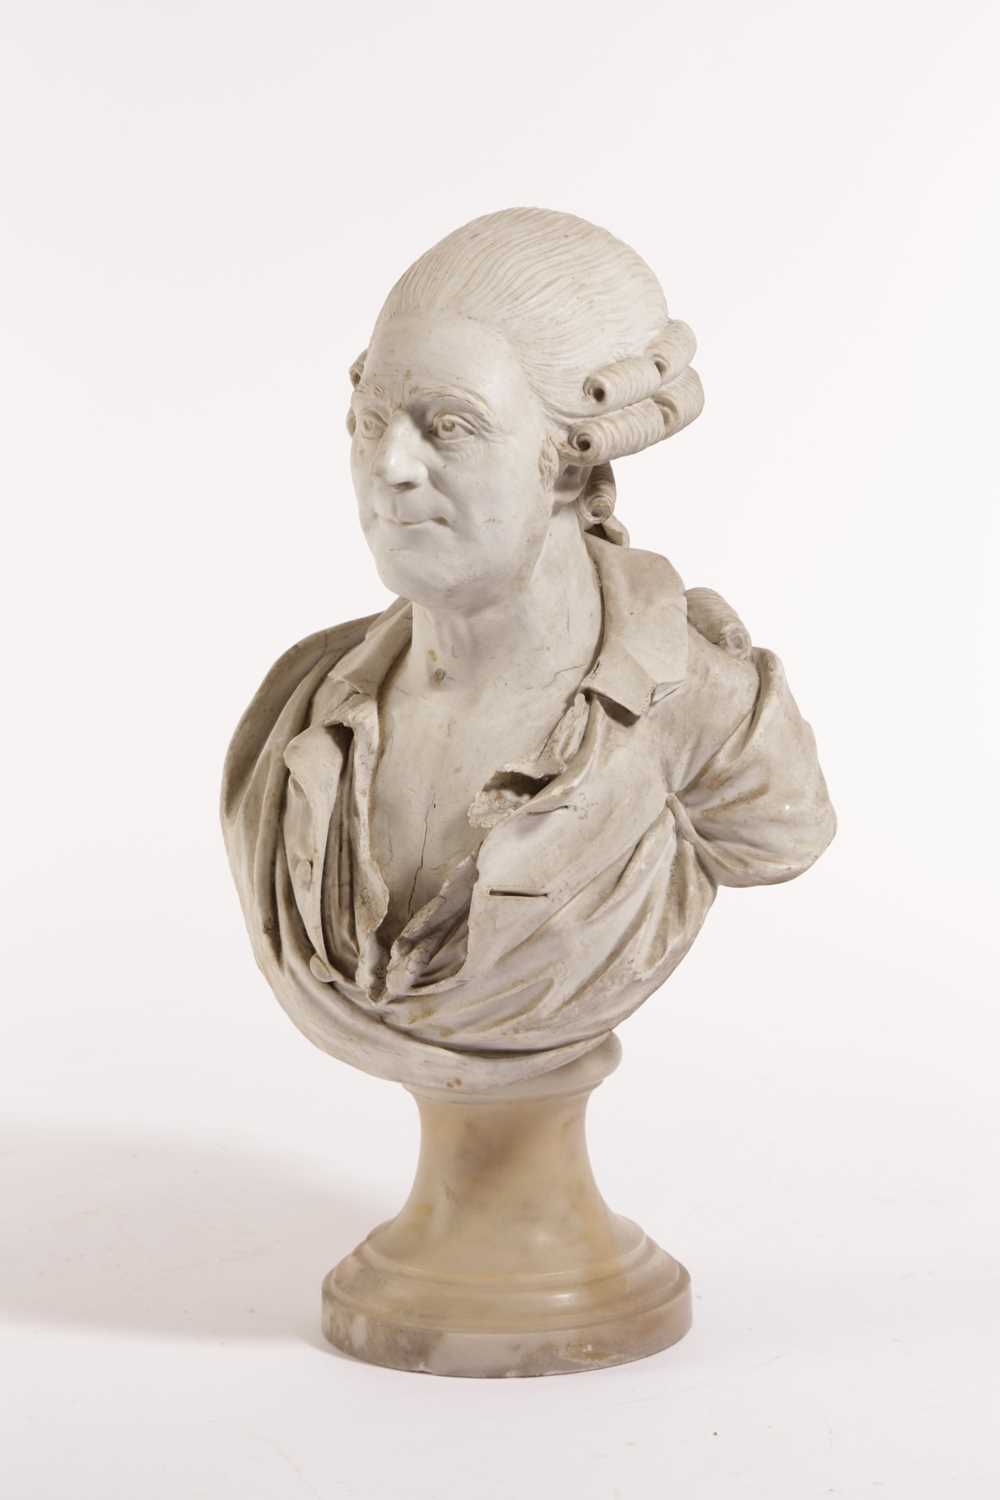 A CONTINENTAL BISCUIT PORCELAIN BUST OF A GENTLEMAN 18TH CENTURY possibly of the philosopher Jean - Image 2 of 2